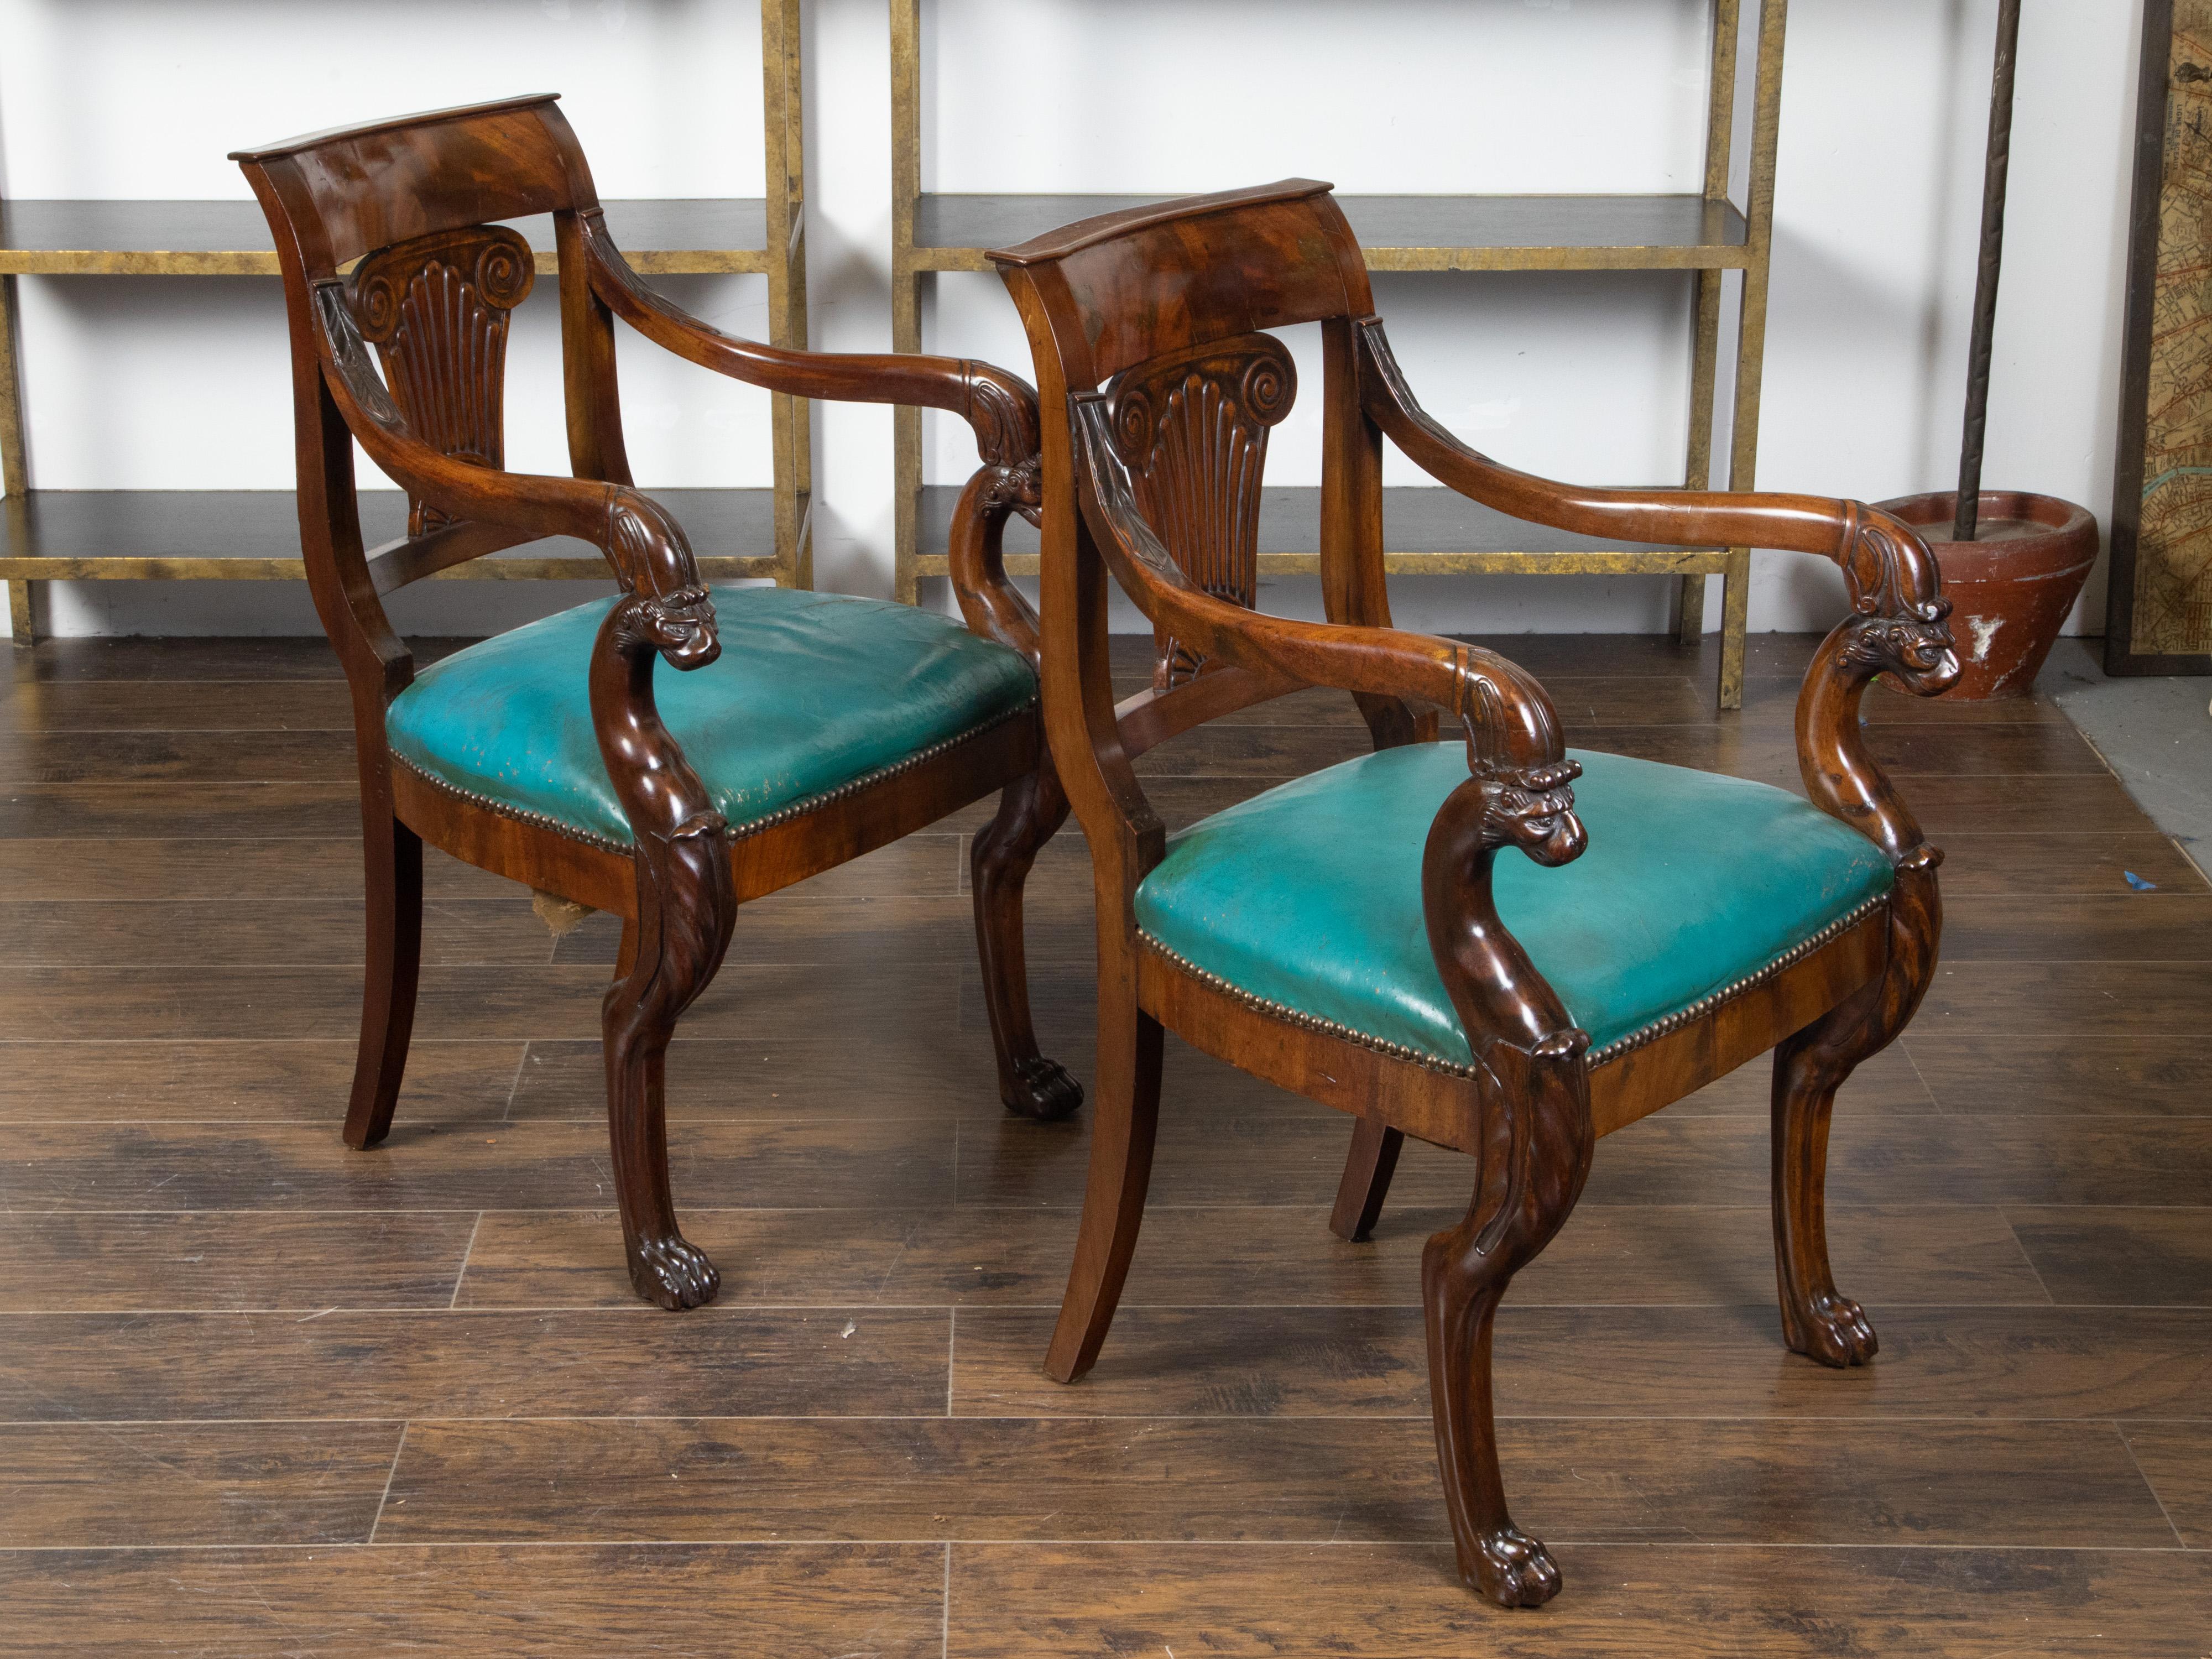 Pair of English Regency 1840s Mahogany Chairs with Ionic Capitals and Griffons For Sale 8